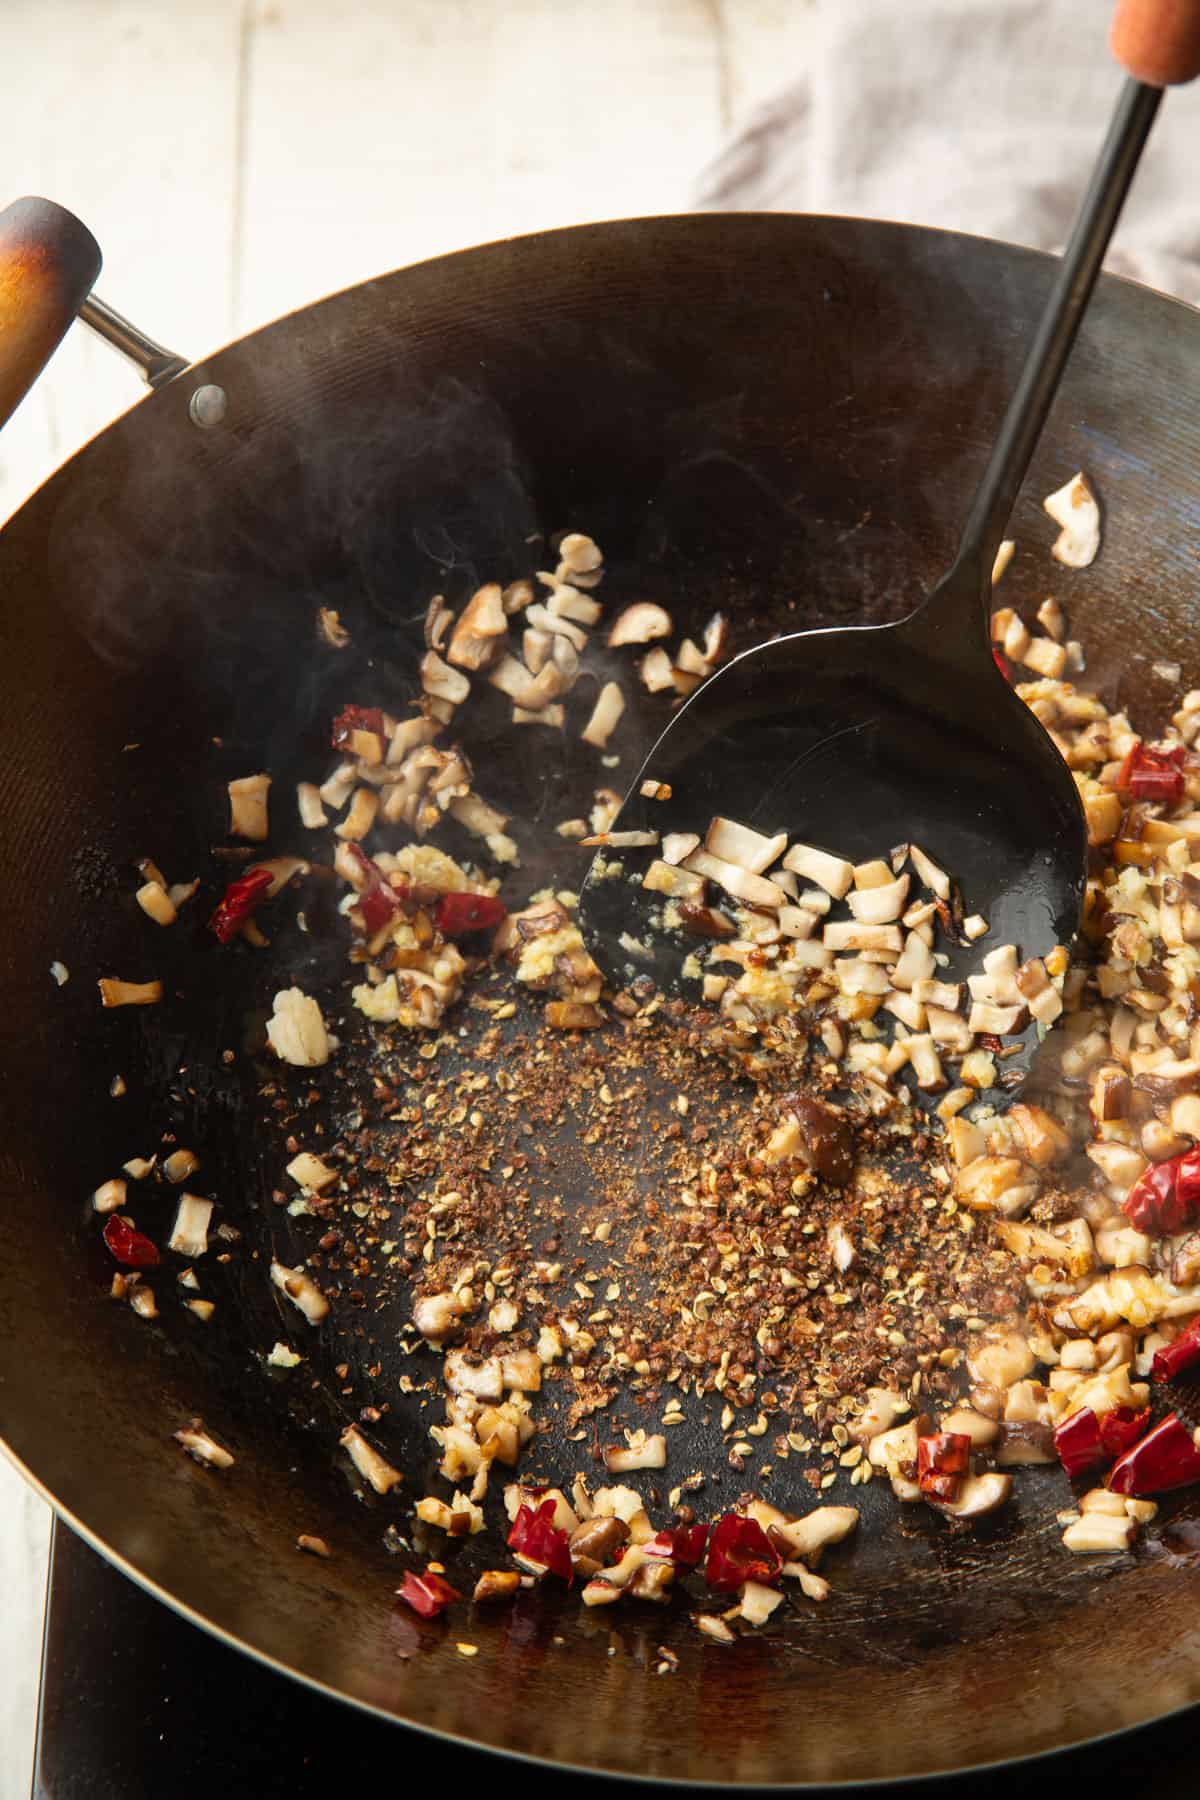 Szechuan peppercorns cooking in a wok wiht dried chiles, shiitake mushrooms, and aromatics.